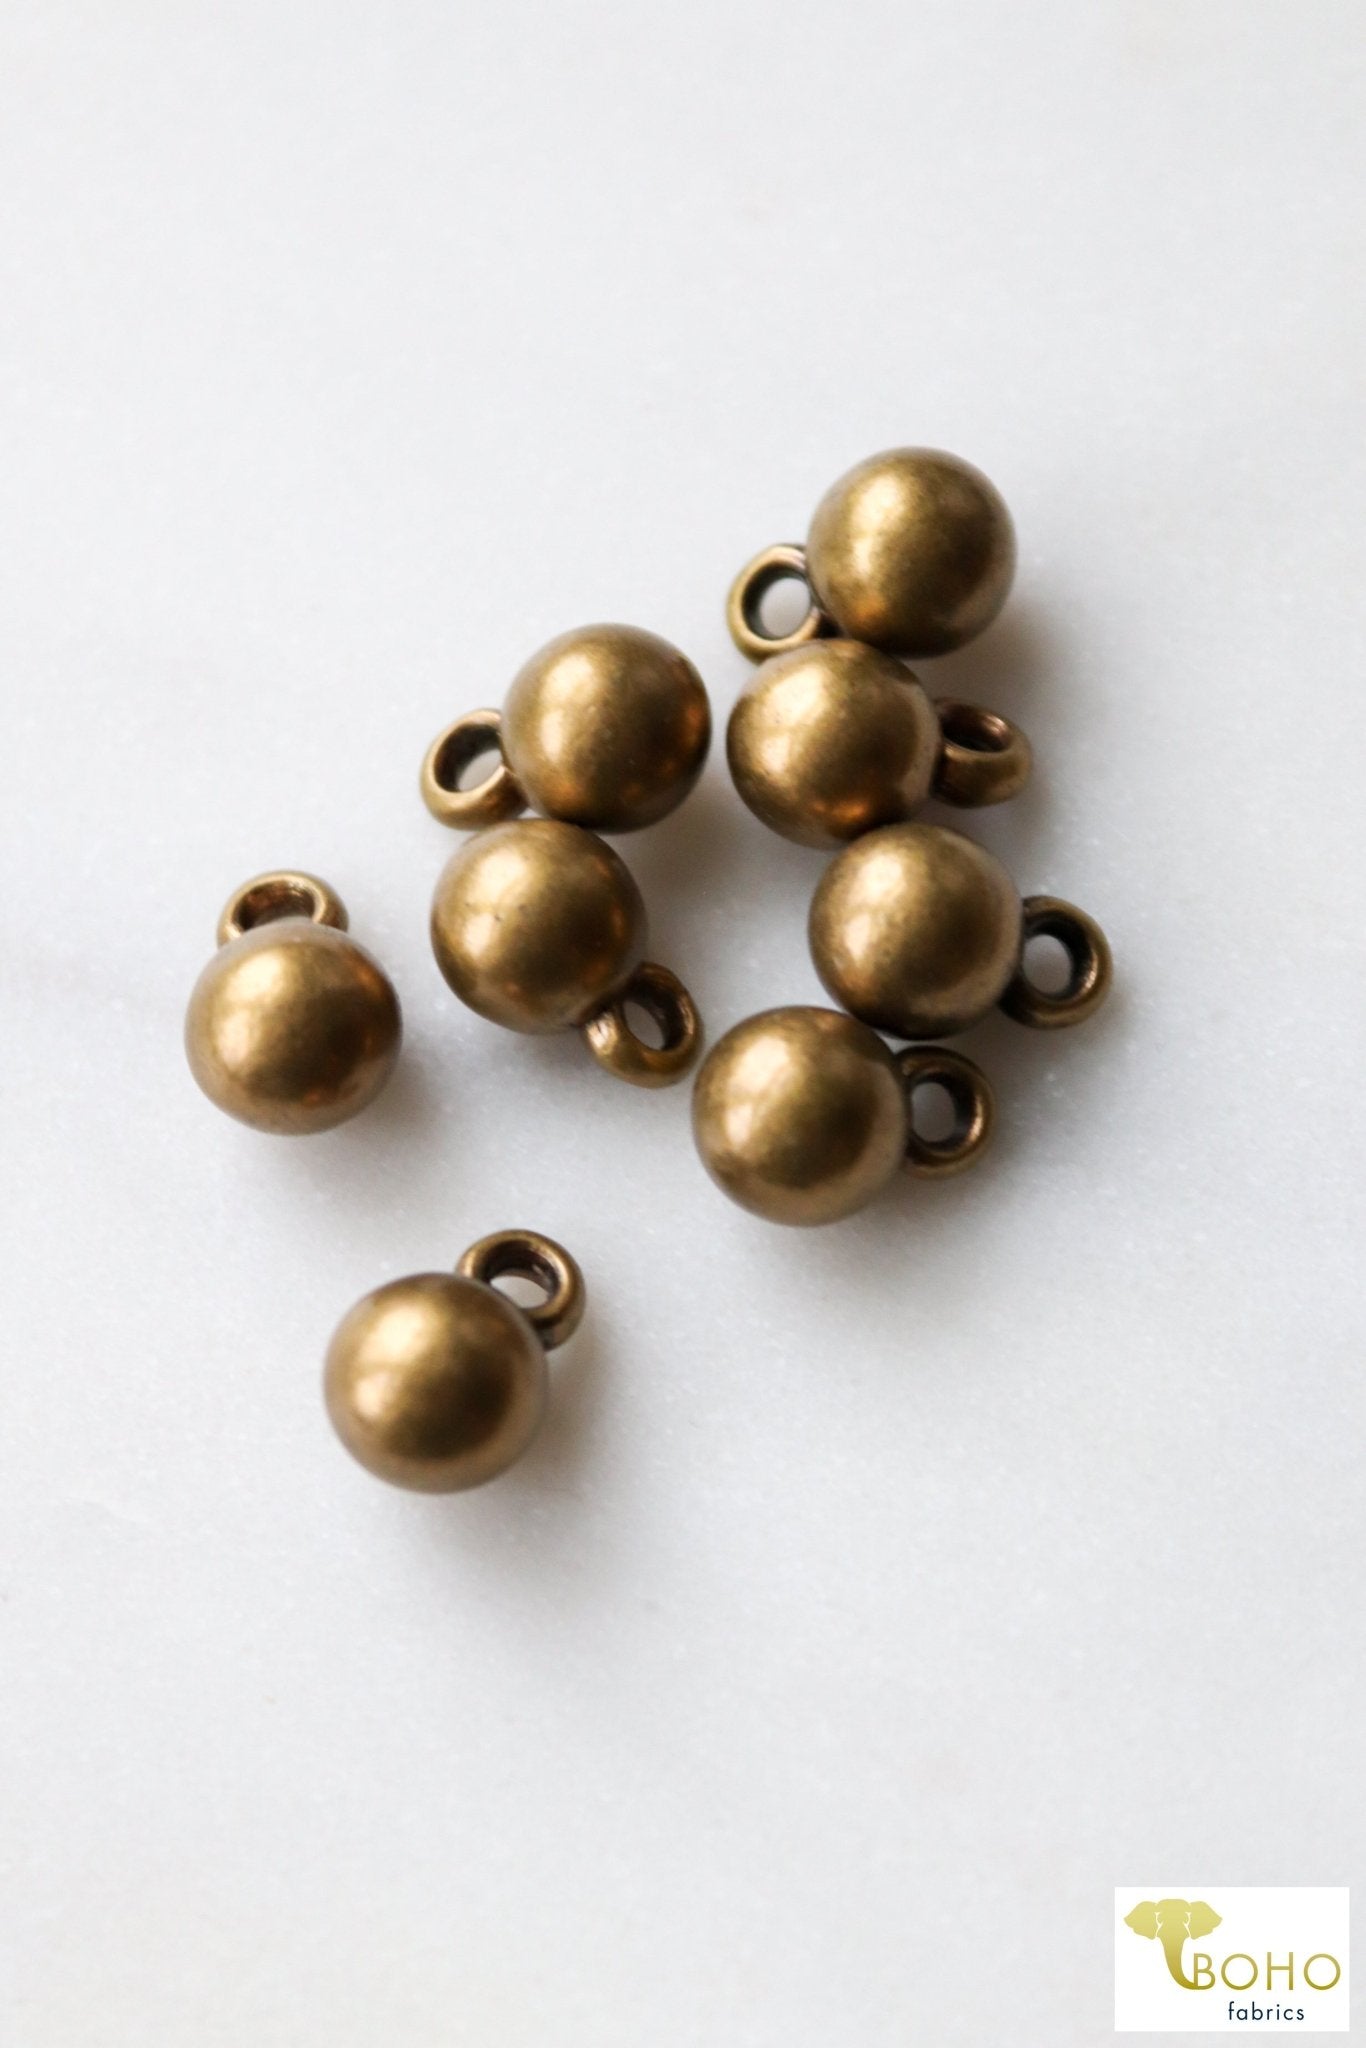 Antique Brass, 8mm Round Ball Button with Shank. Package of 20 HW-007 - Boho Fabrics